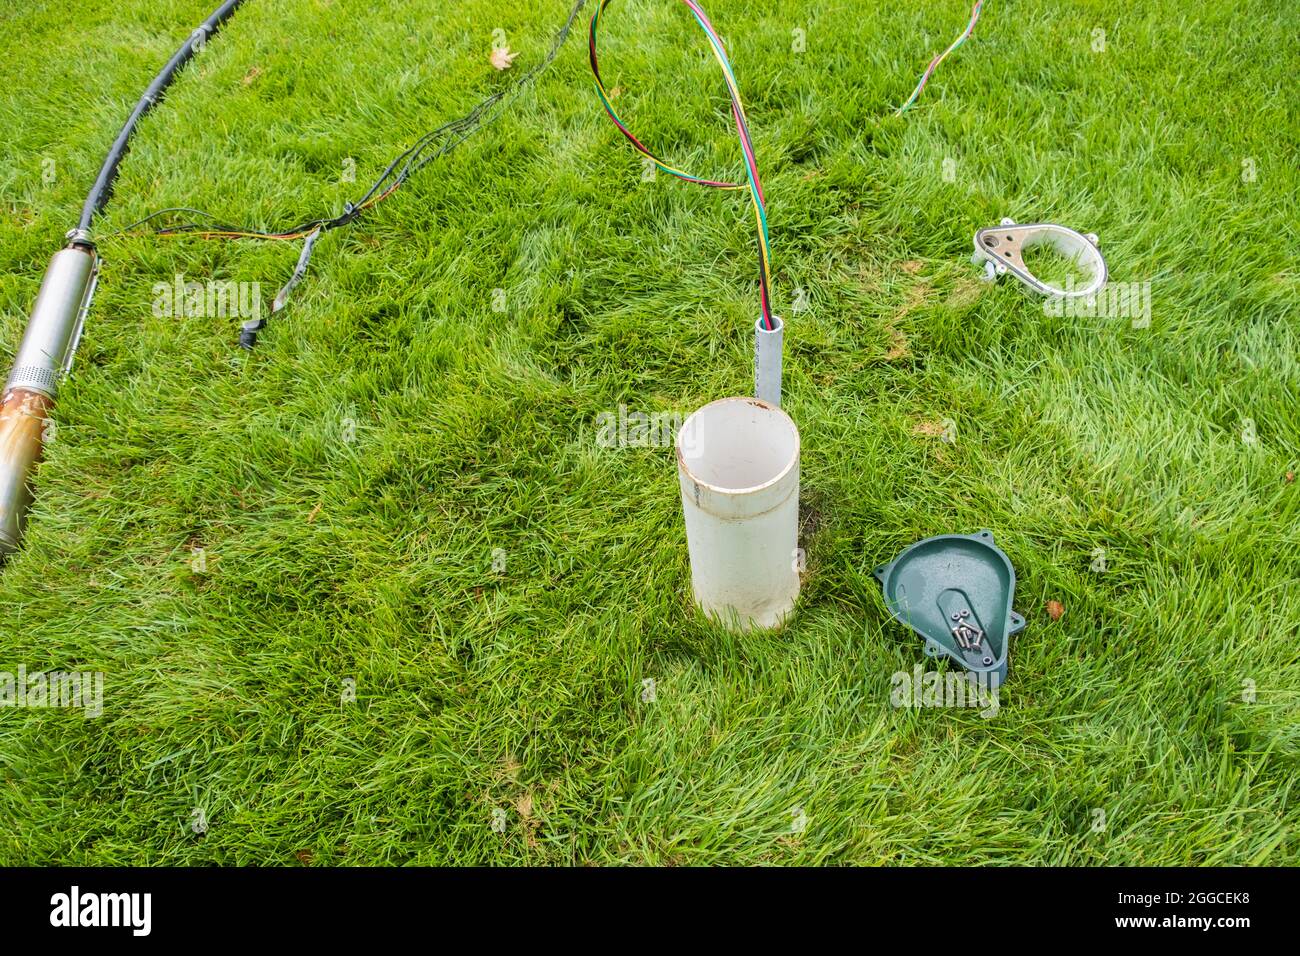 Faulty in ground lawn sprinkler pump  lying in tall fescue grass in the process of being changed out for a new one. A water well wellhead. Stock Photo